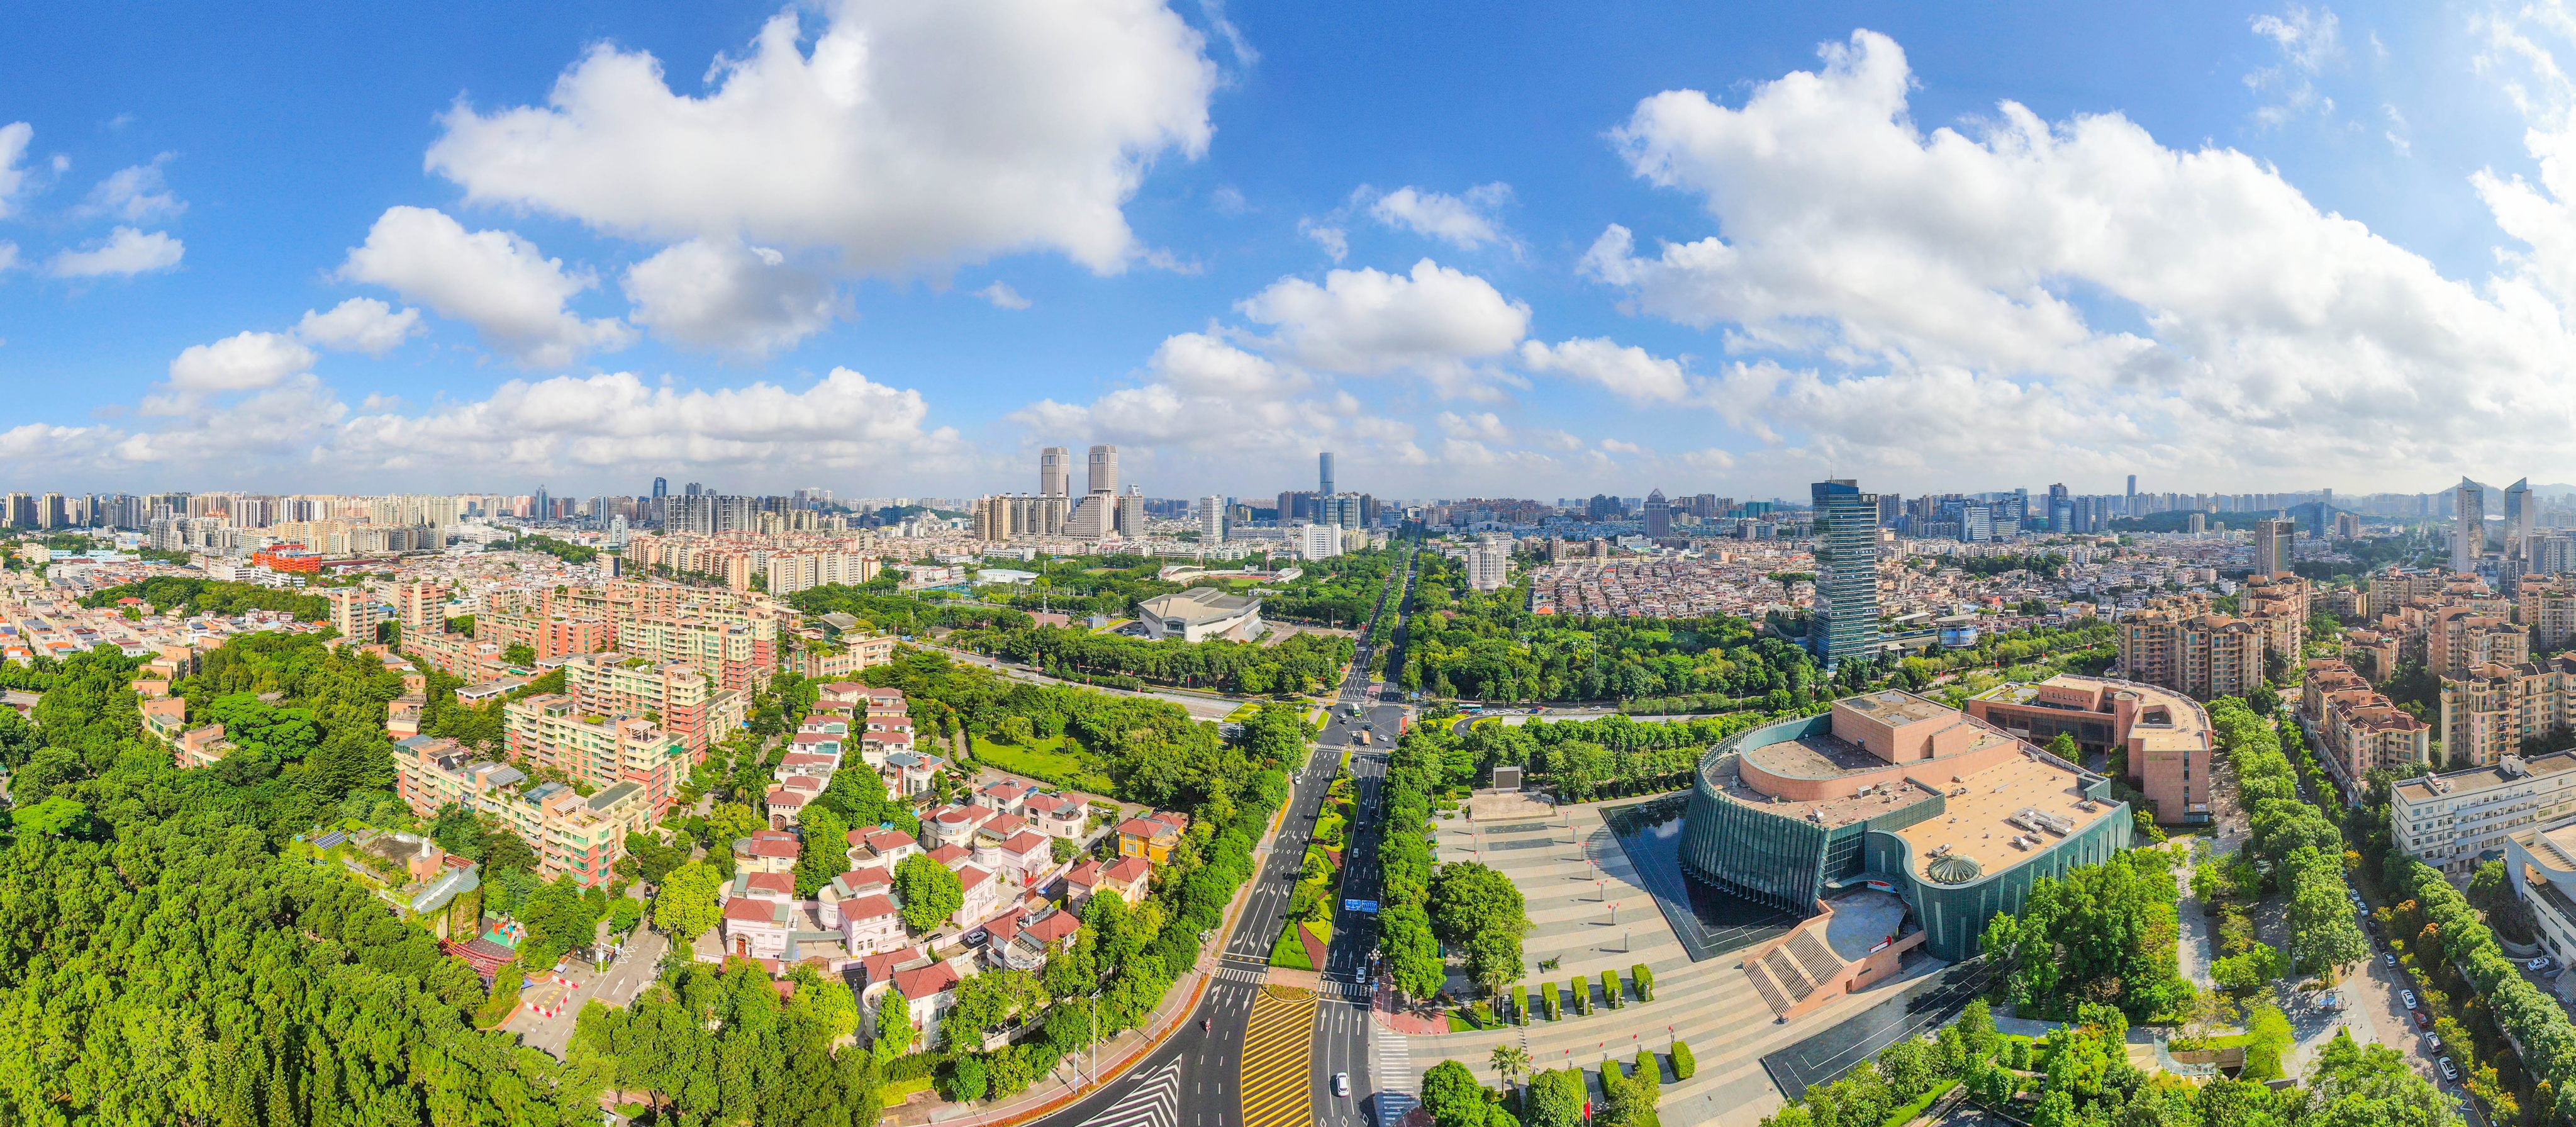 Zhongshan is moving towards becoming the city with the fastest approval speed and the best business environment in the Greater Bay Area. The photo shows the urban landscape of Zhongshan City. Photo: Ye Zhiwen
